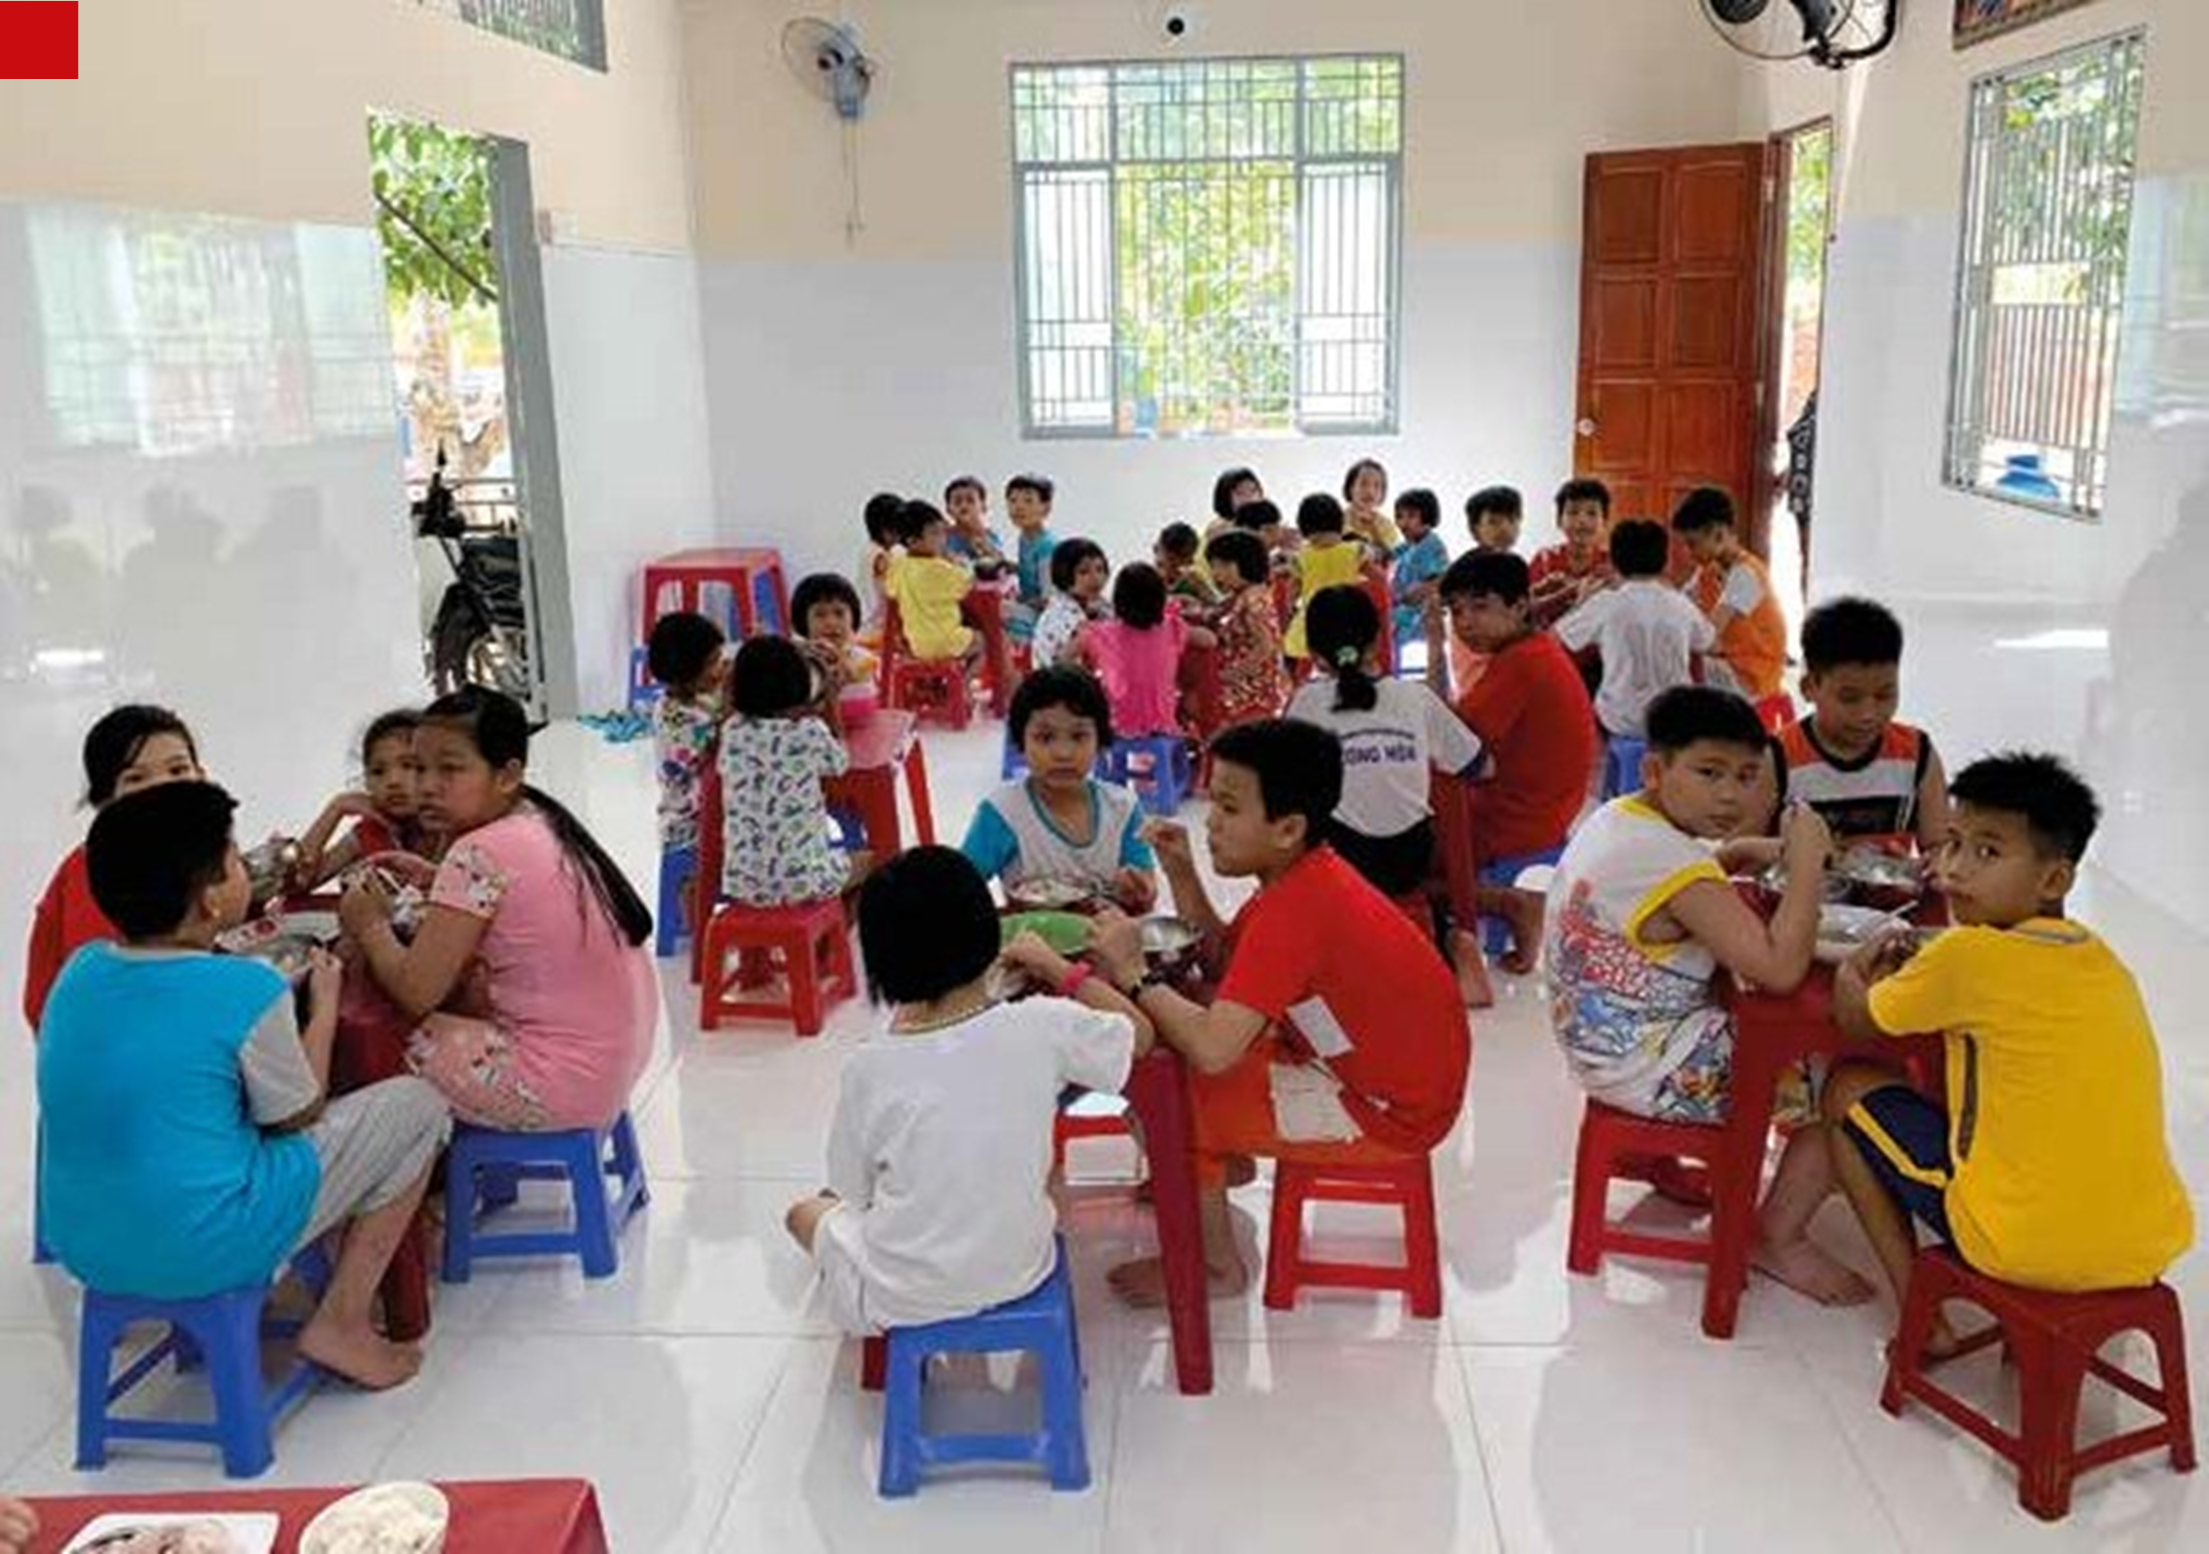 Orphanage in Can Tho, Vietnam reduced meal portions for children as the child sponsorship received decreased during the pandemic